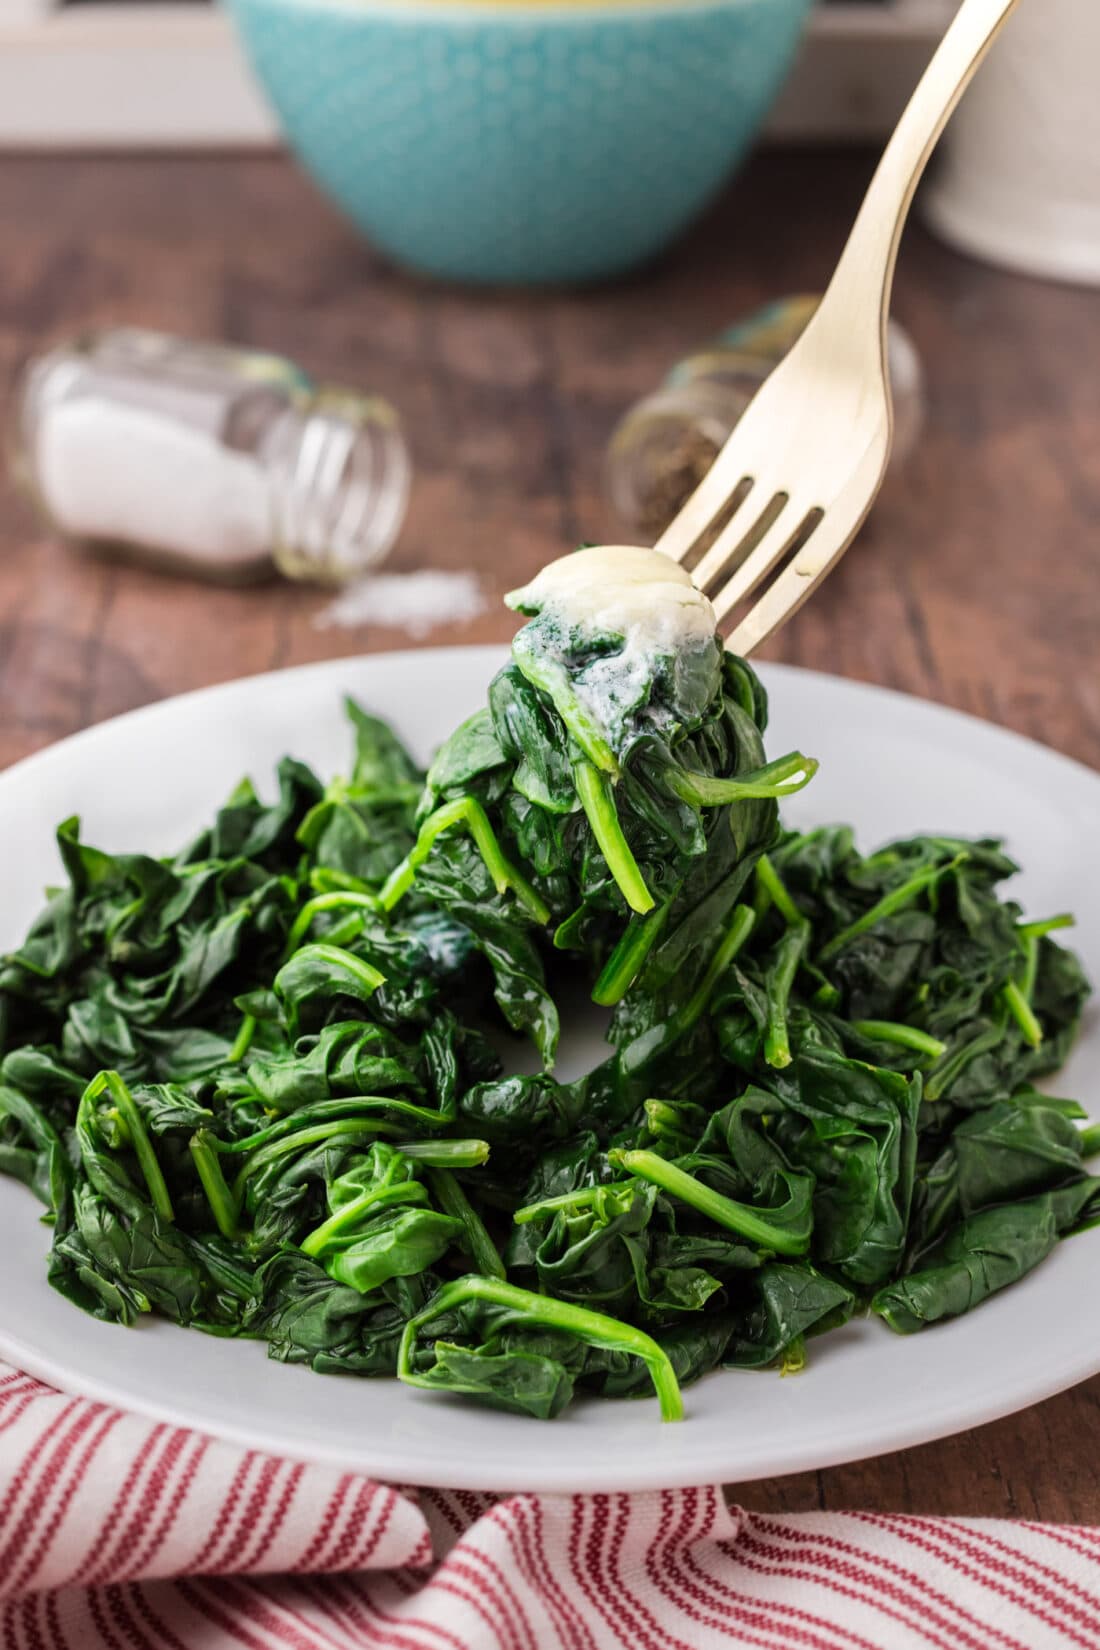 Steamed Spinach being lifted off of a plate by a fork